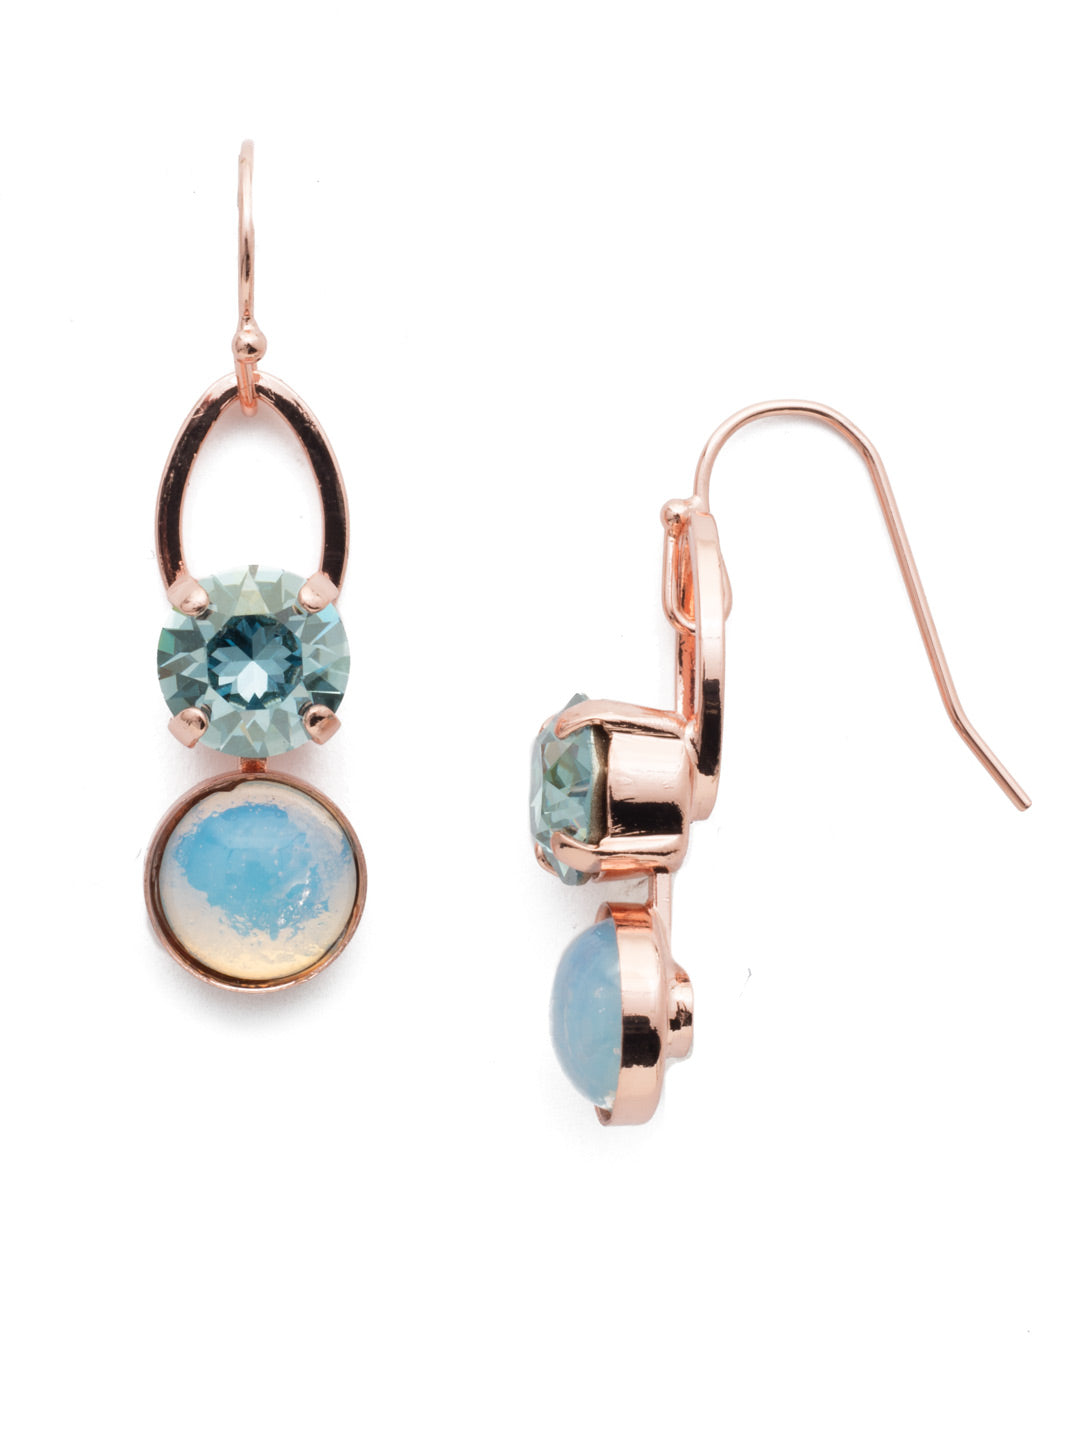 Astro Dangle Earrings - EET4RGCAZ - Our Astro Dangle Earrings shine like a moonlit sky. Delicate metal gives way to sparkling and opaque crystal stones. From Sorrelli's Crystal Azure collection in our Rose Gold-tone finish.